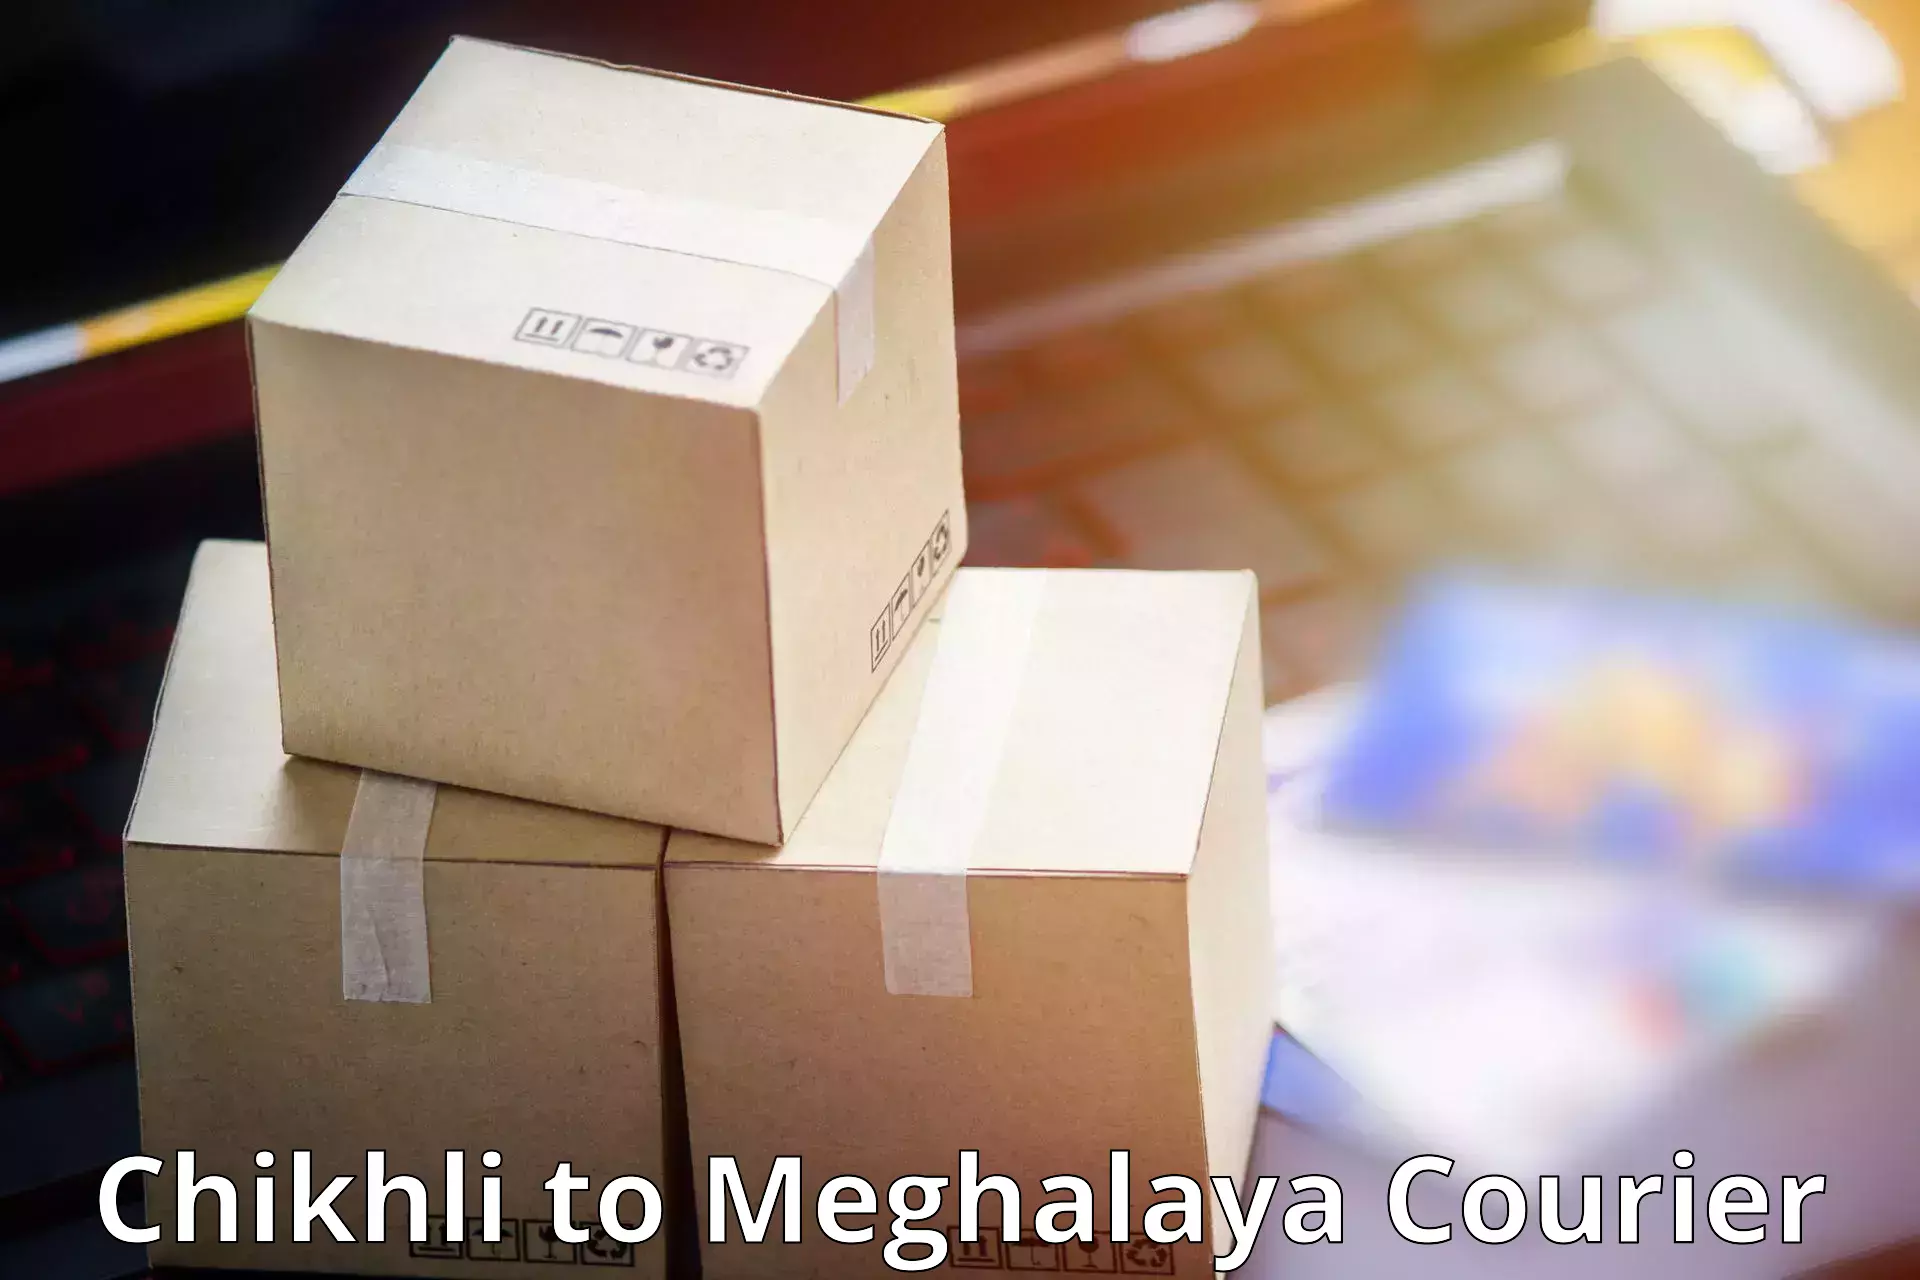 Multi-national courier services Chikhli to Jaintia Hills